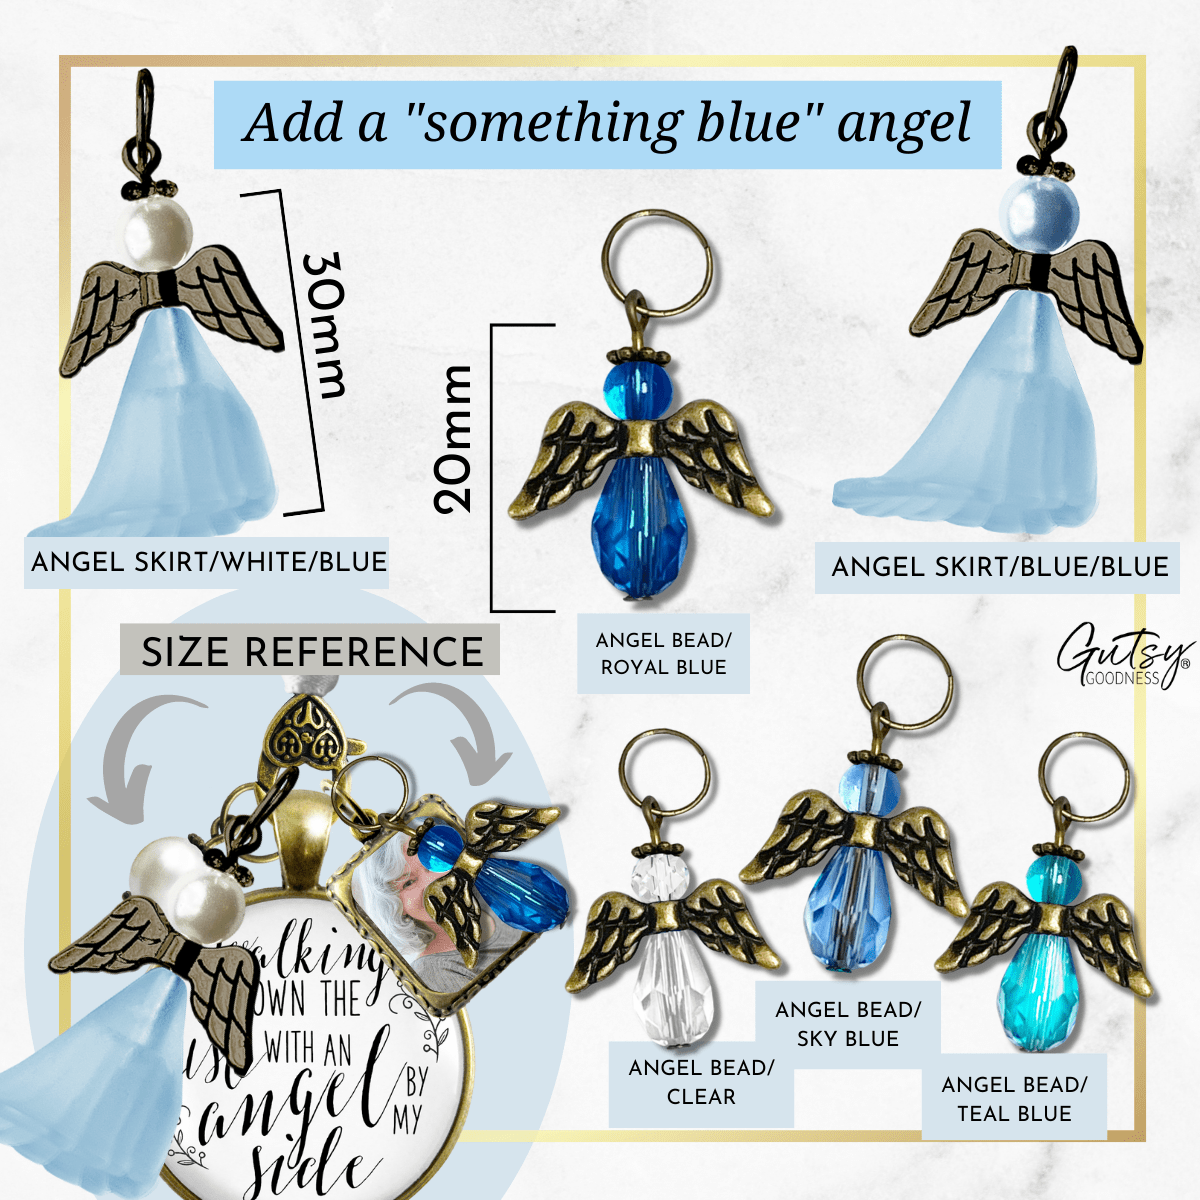 Walking Down The Aisle With An Angel By My Side - Memorial Bouquet Charm, Bronze, Cream Glass, Blue Pearl - 1 Frame  Bouquet Charm - Gutsy Goodness Handmade Jewelry